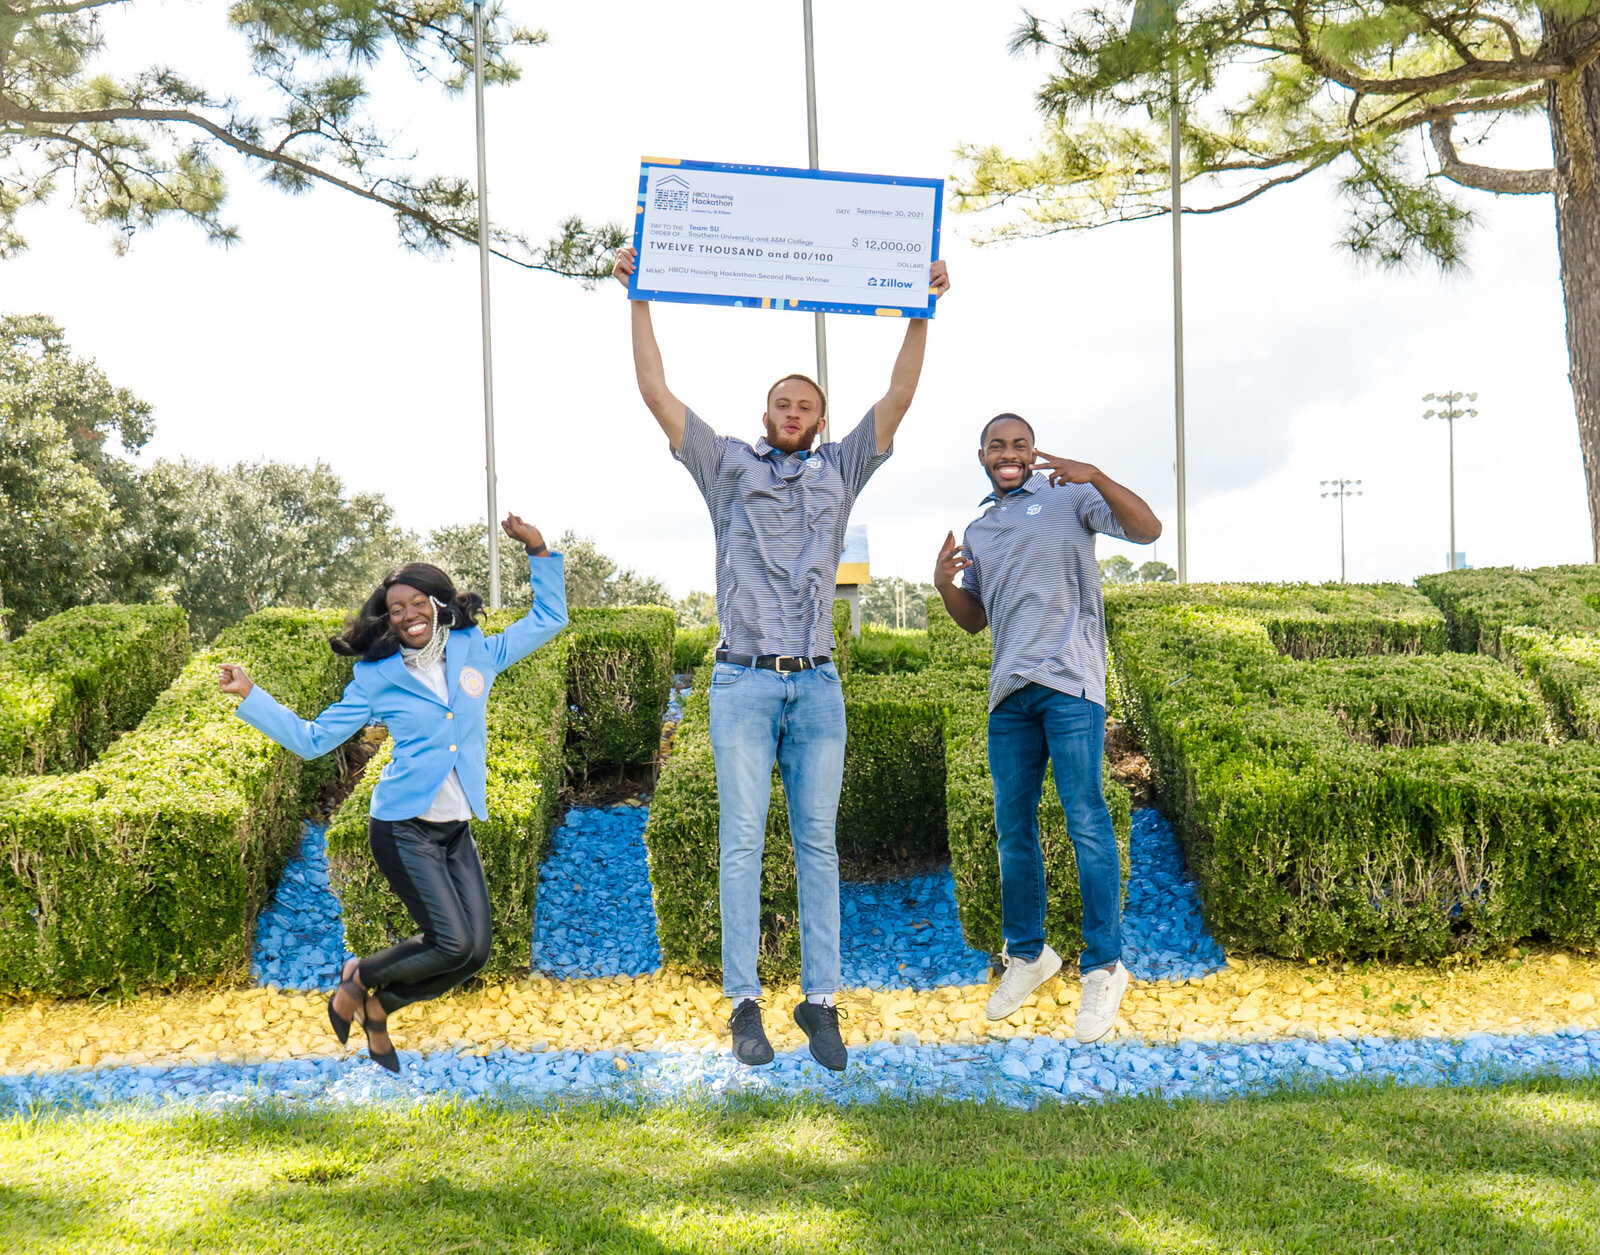 Students jumping with check